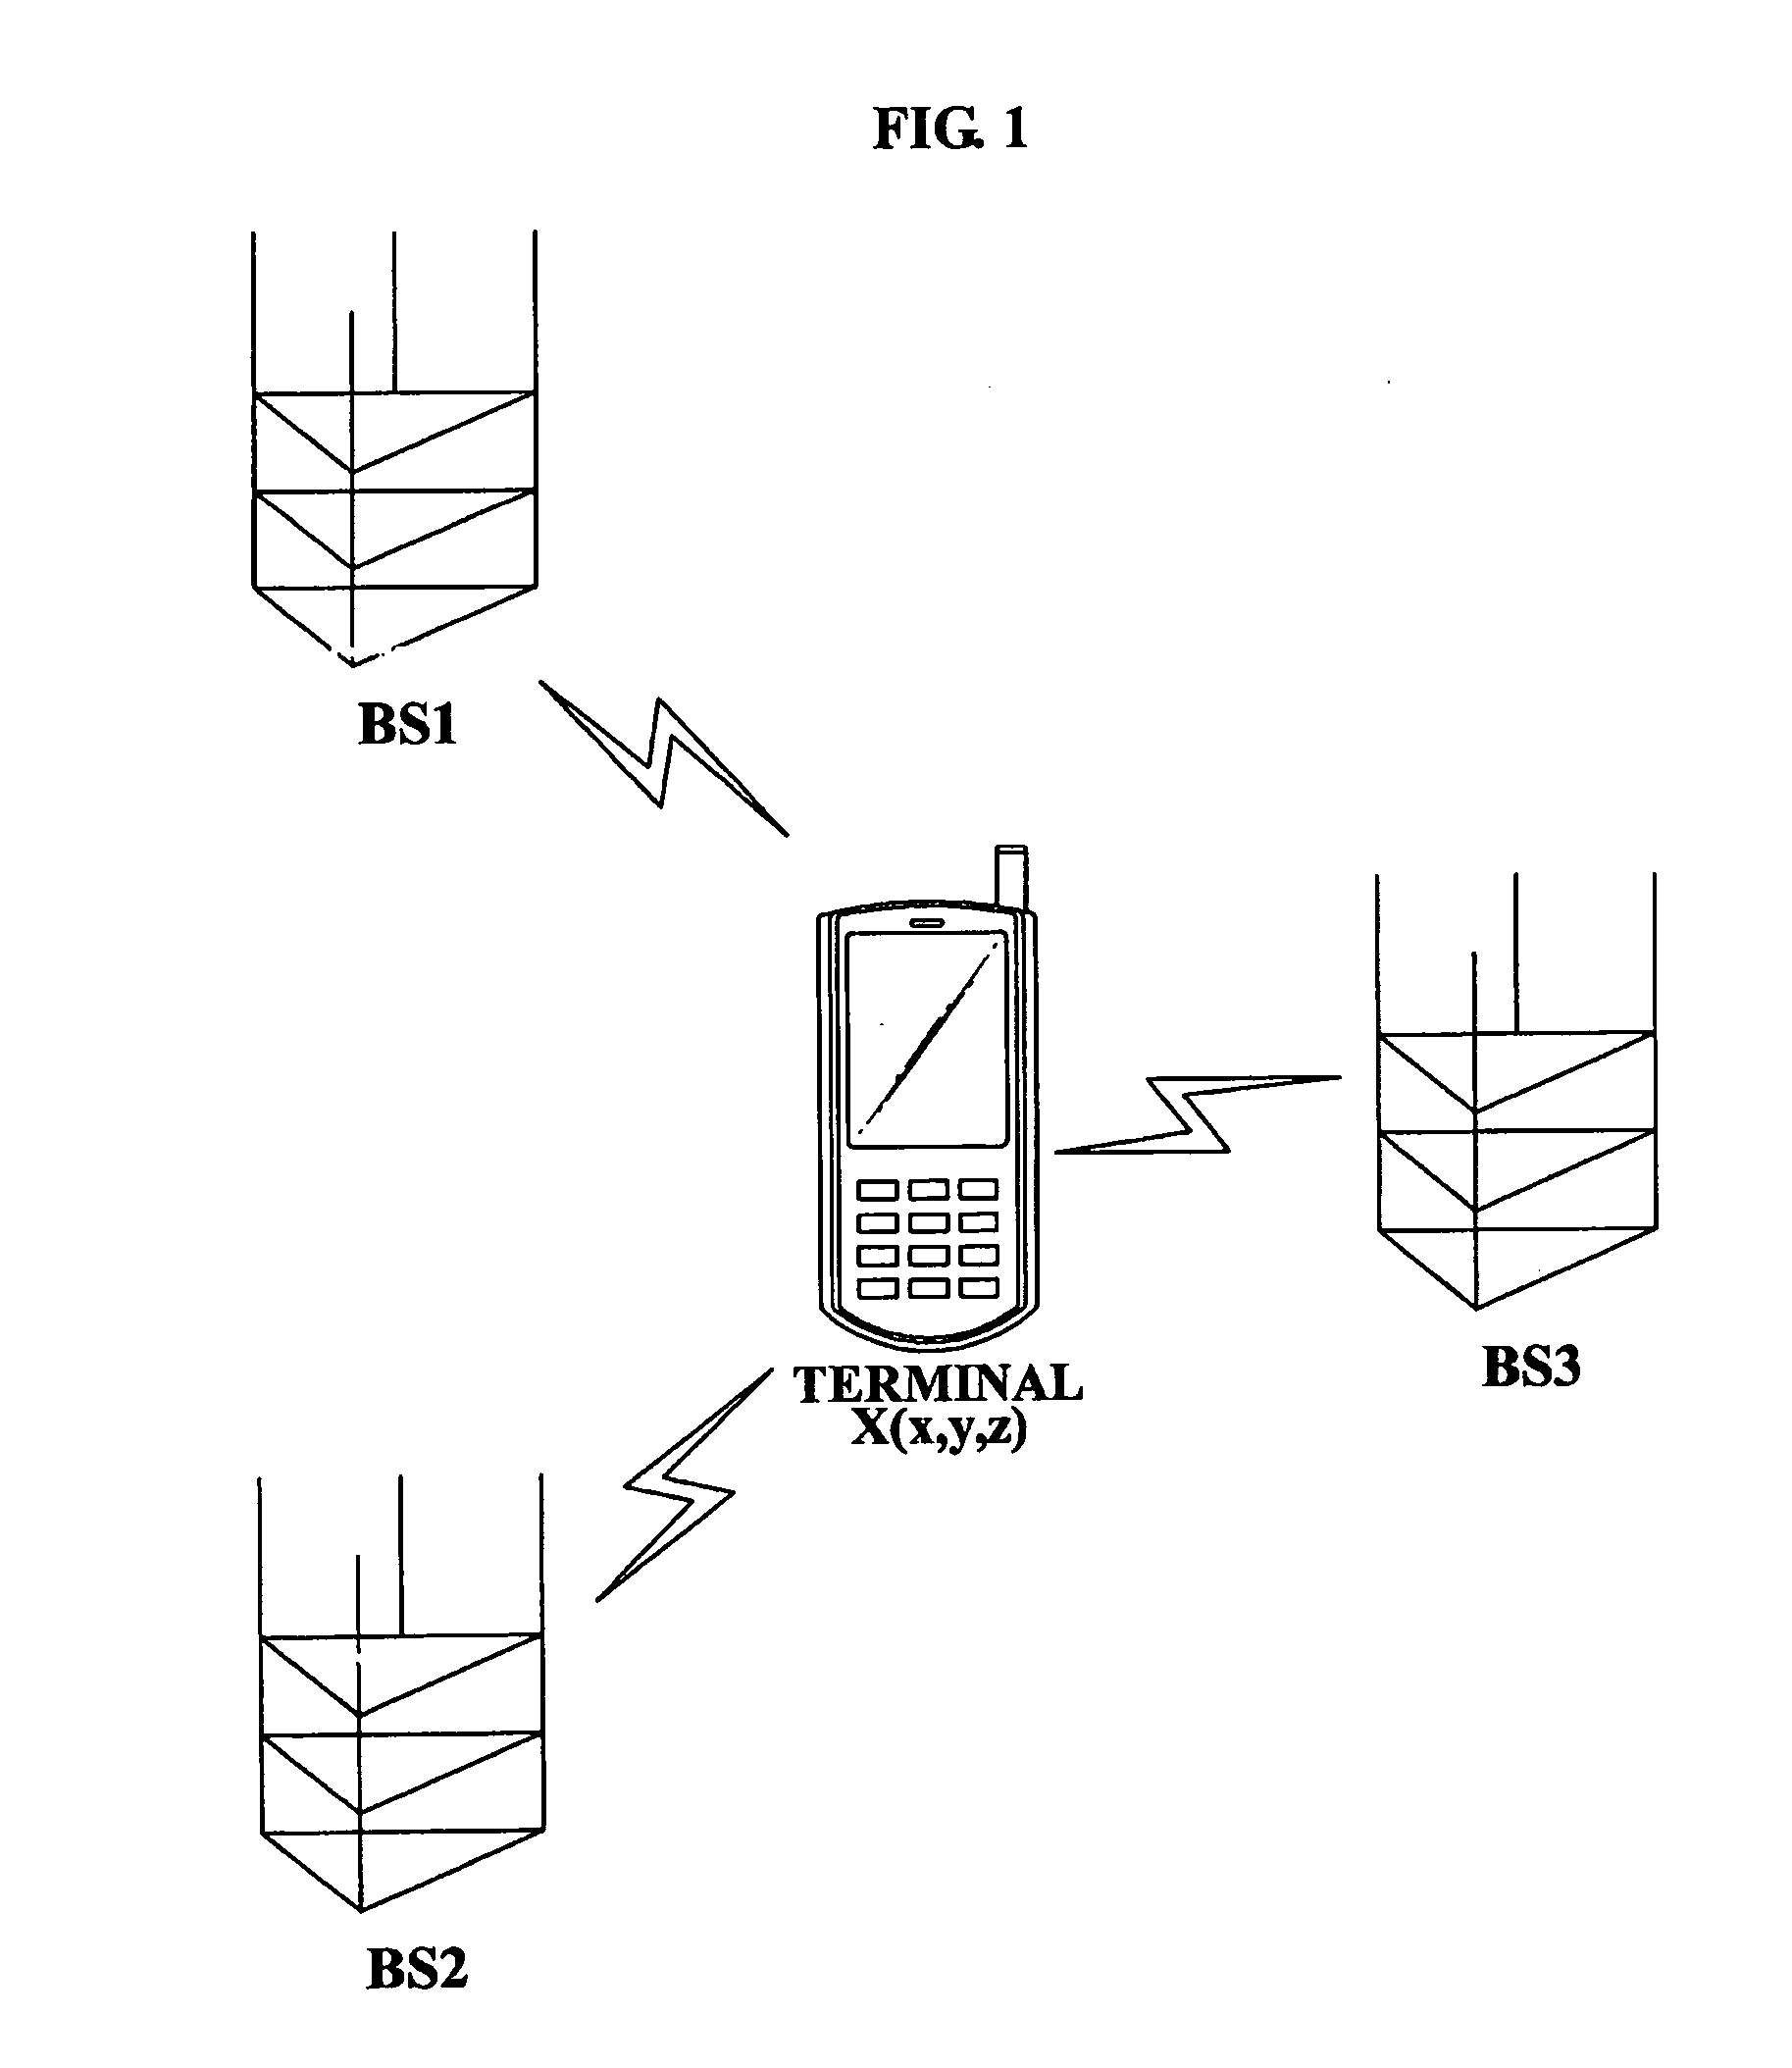 Method and System for Determining Position of Mobile Communication Device Using Ratio Metric